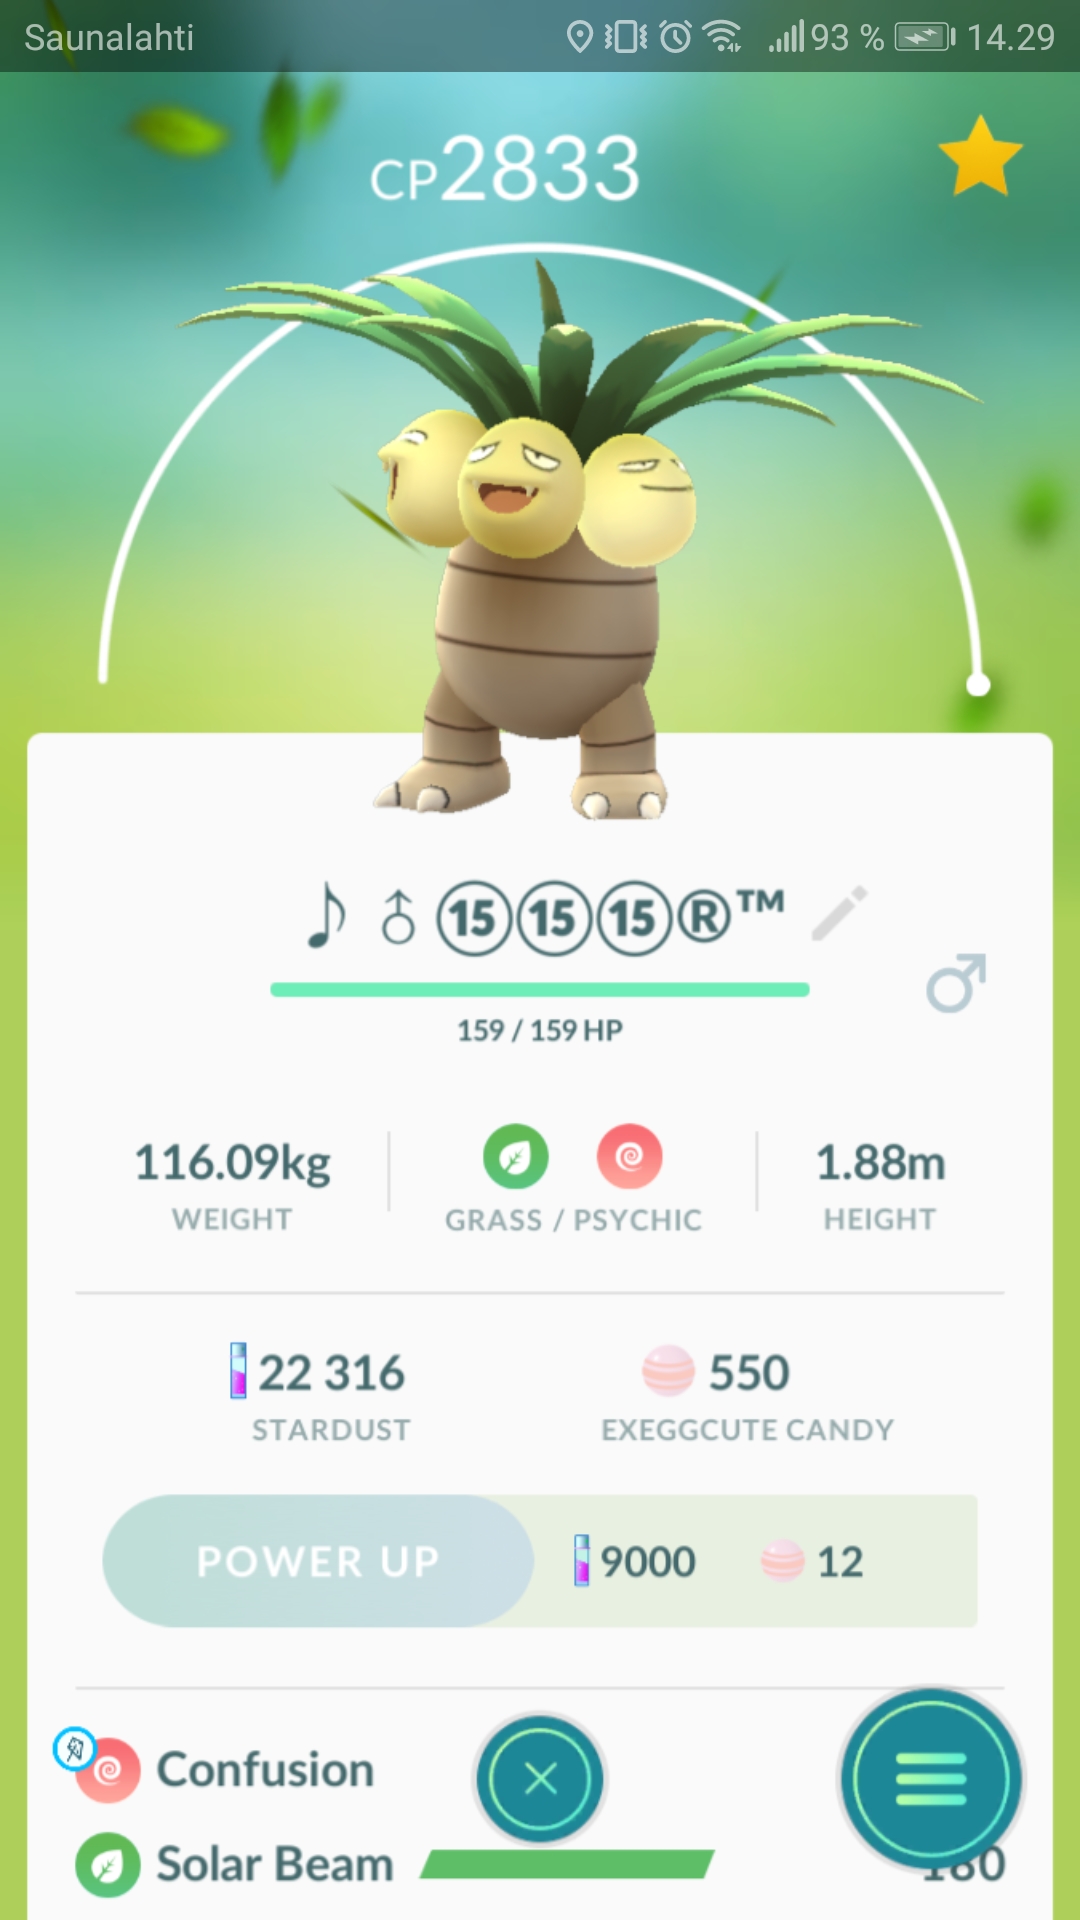 terminology - What is a 'perfect IV Pokemon' and how do I get one